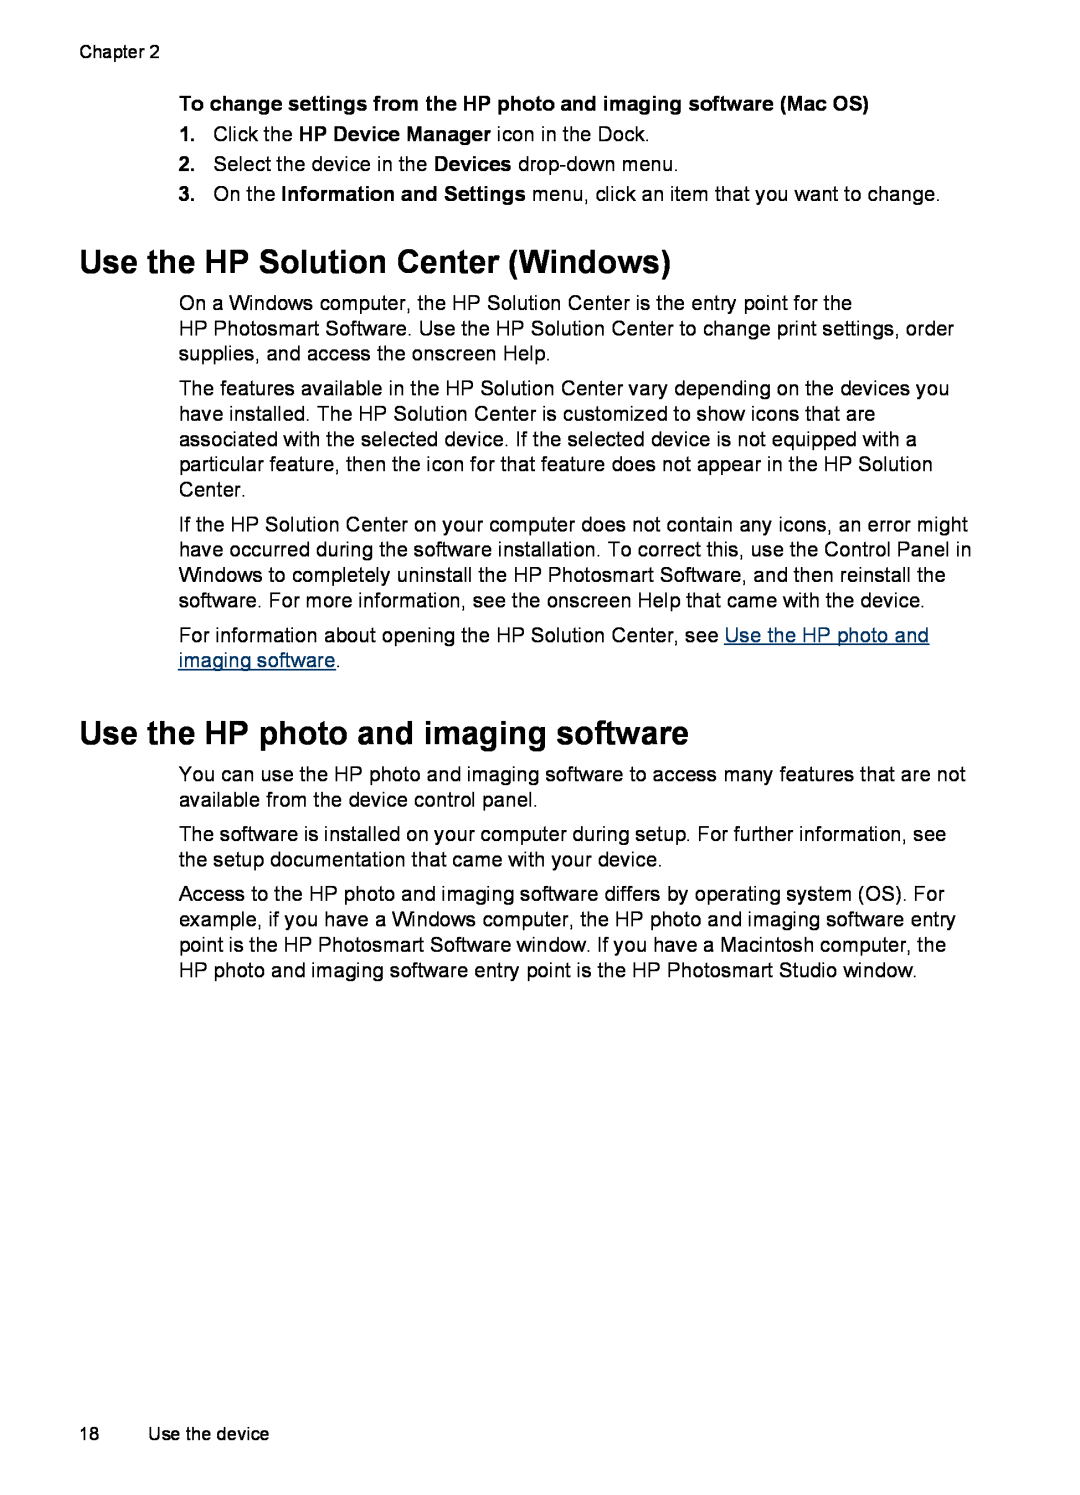 HP J4580, J4680, J4660, J4540, J4550 manual Use the HP Solution Center Windows, Use the HP photo and imaging software 